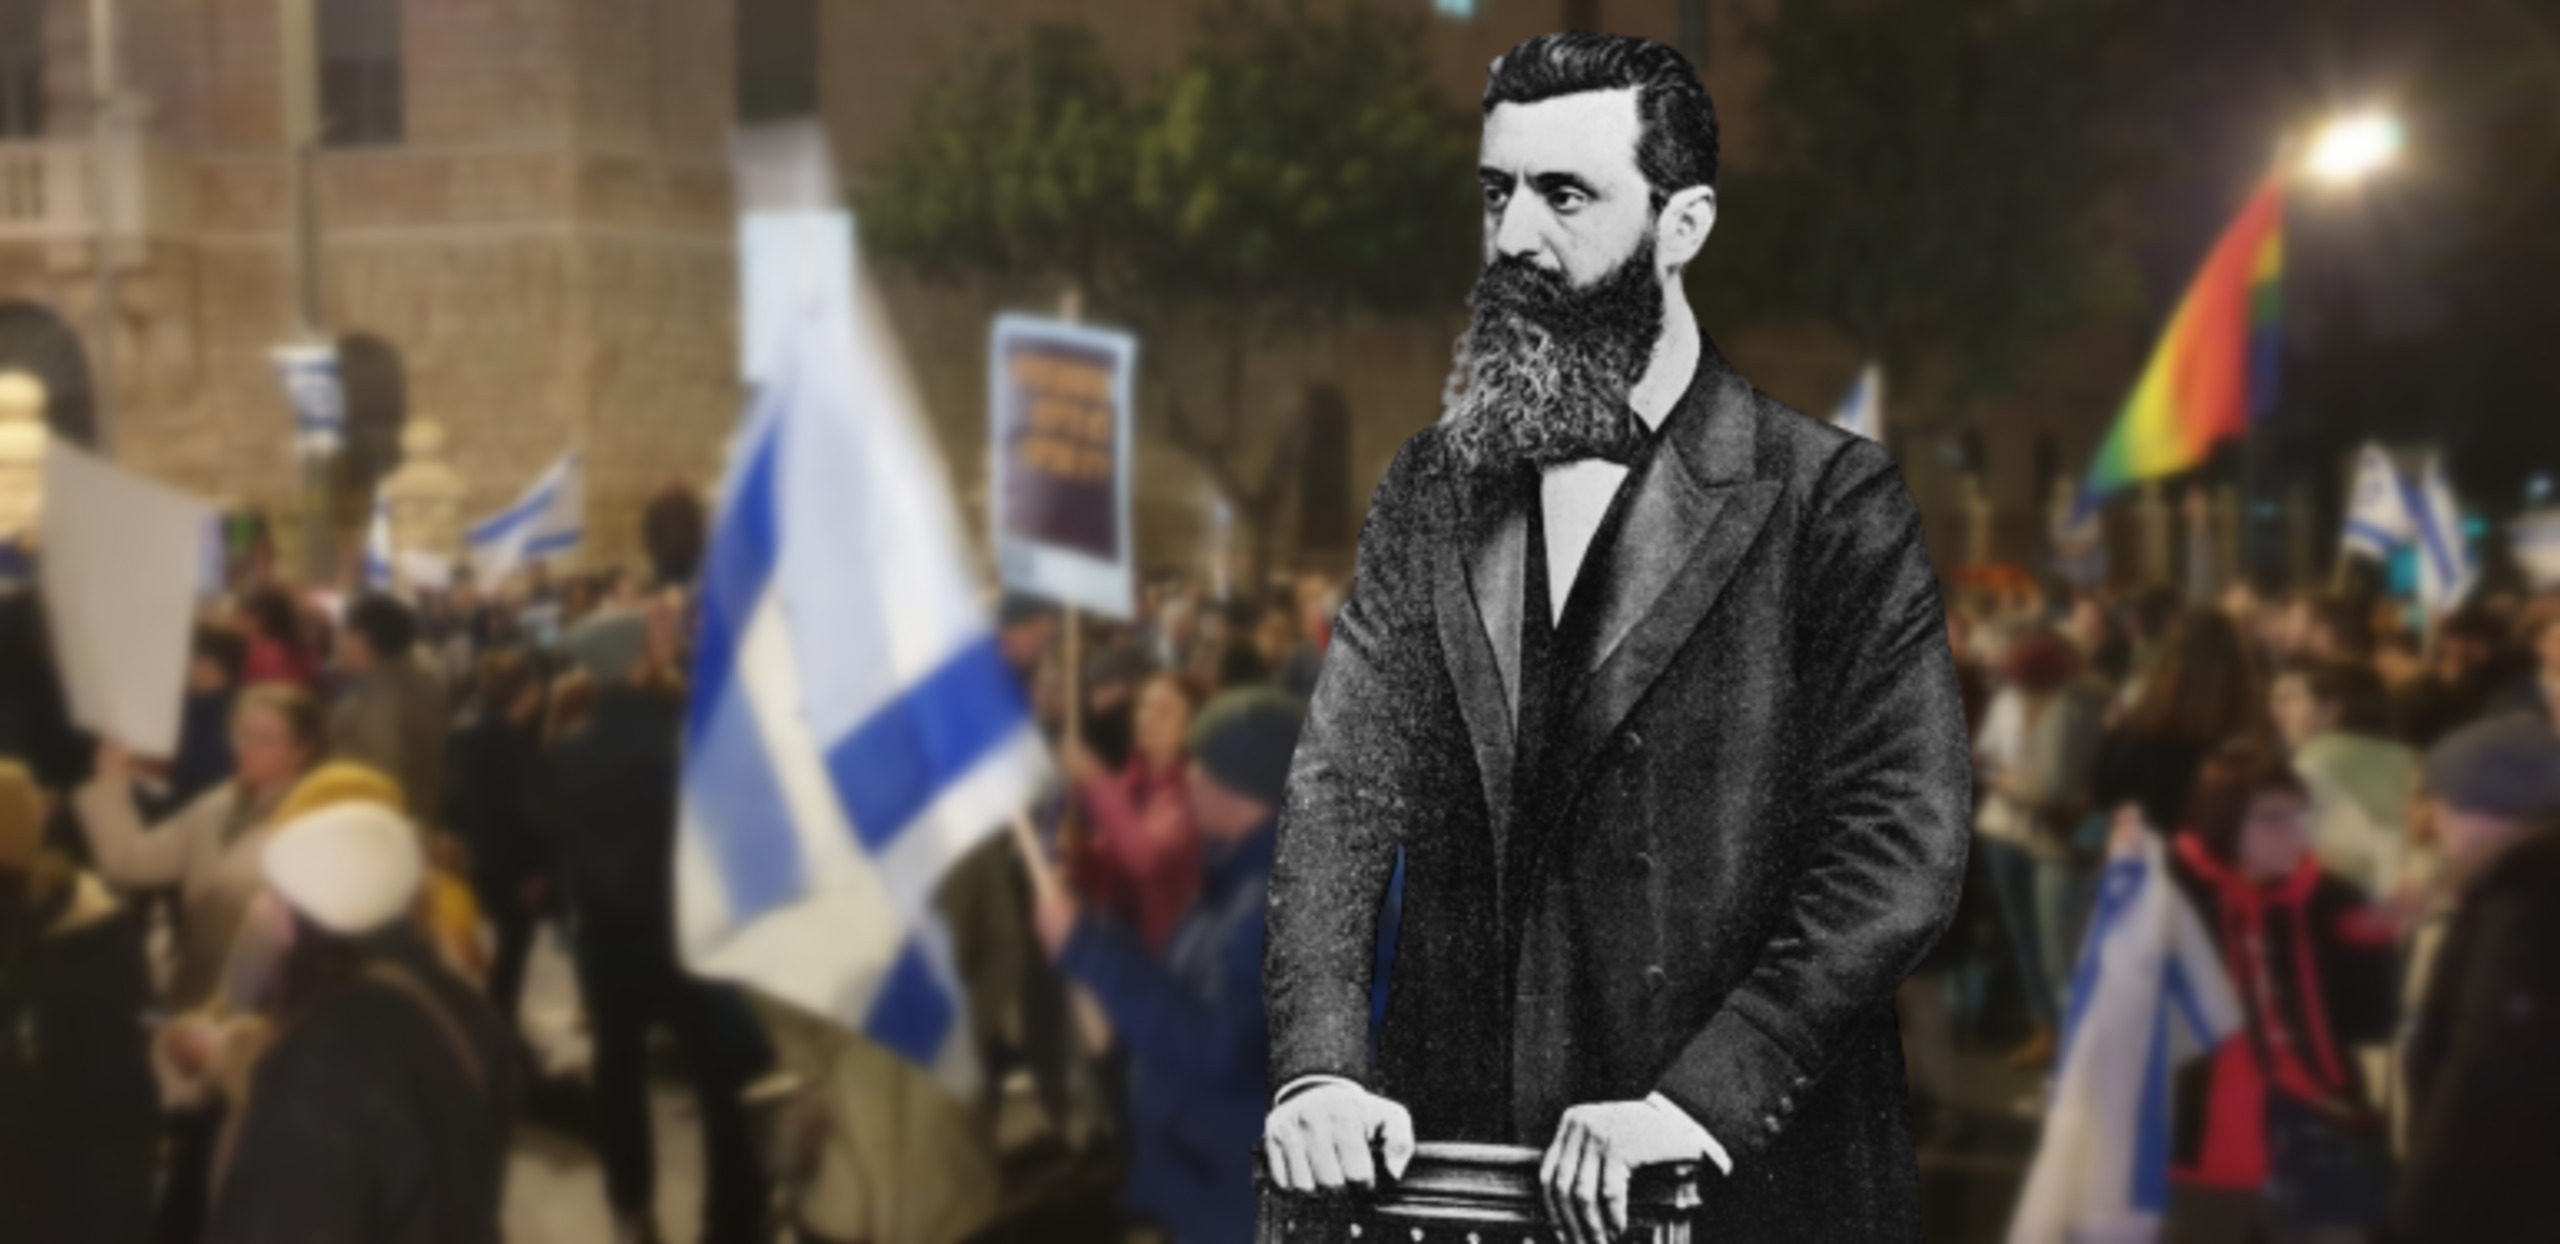 Theodor Herzl: The Solution to Israel’s Modern Problems?